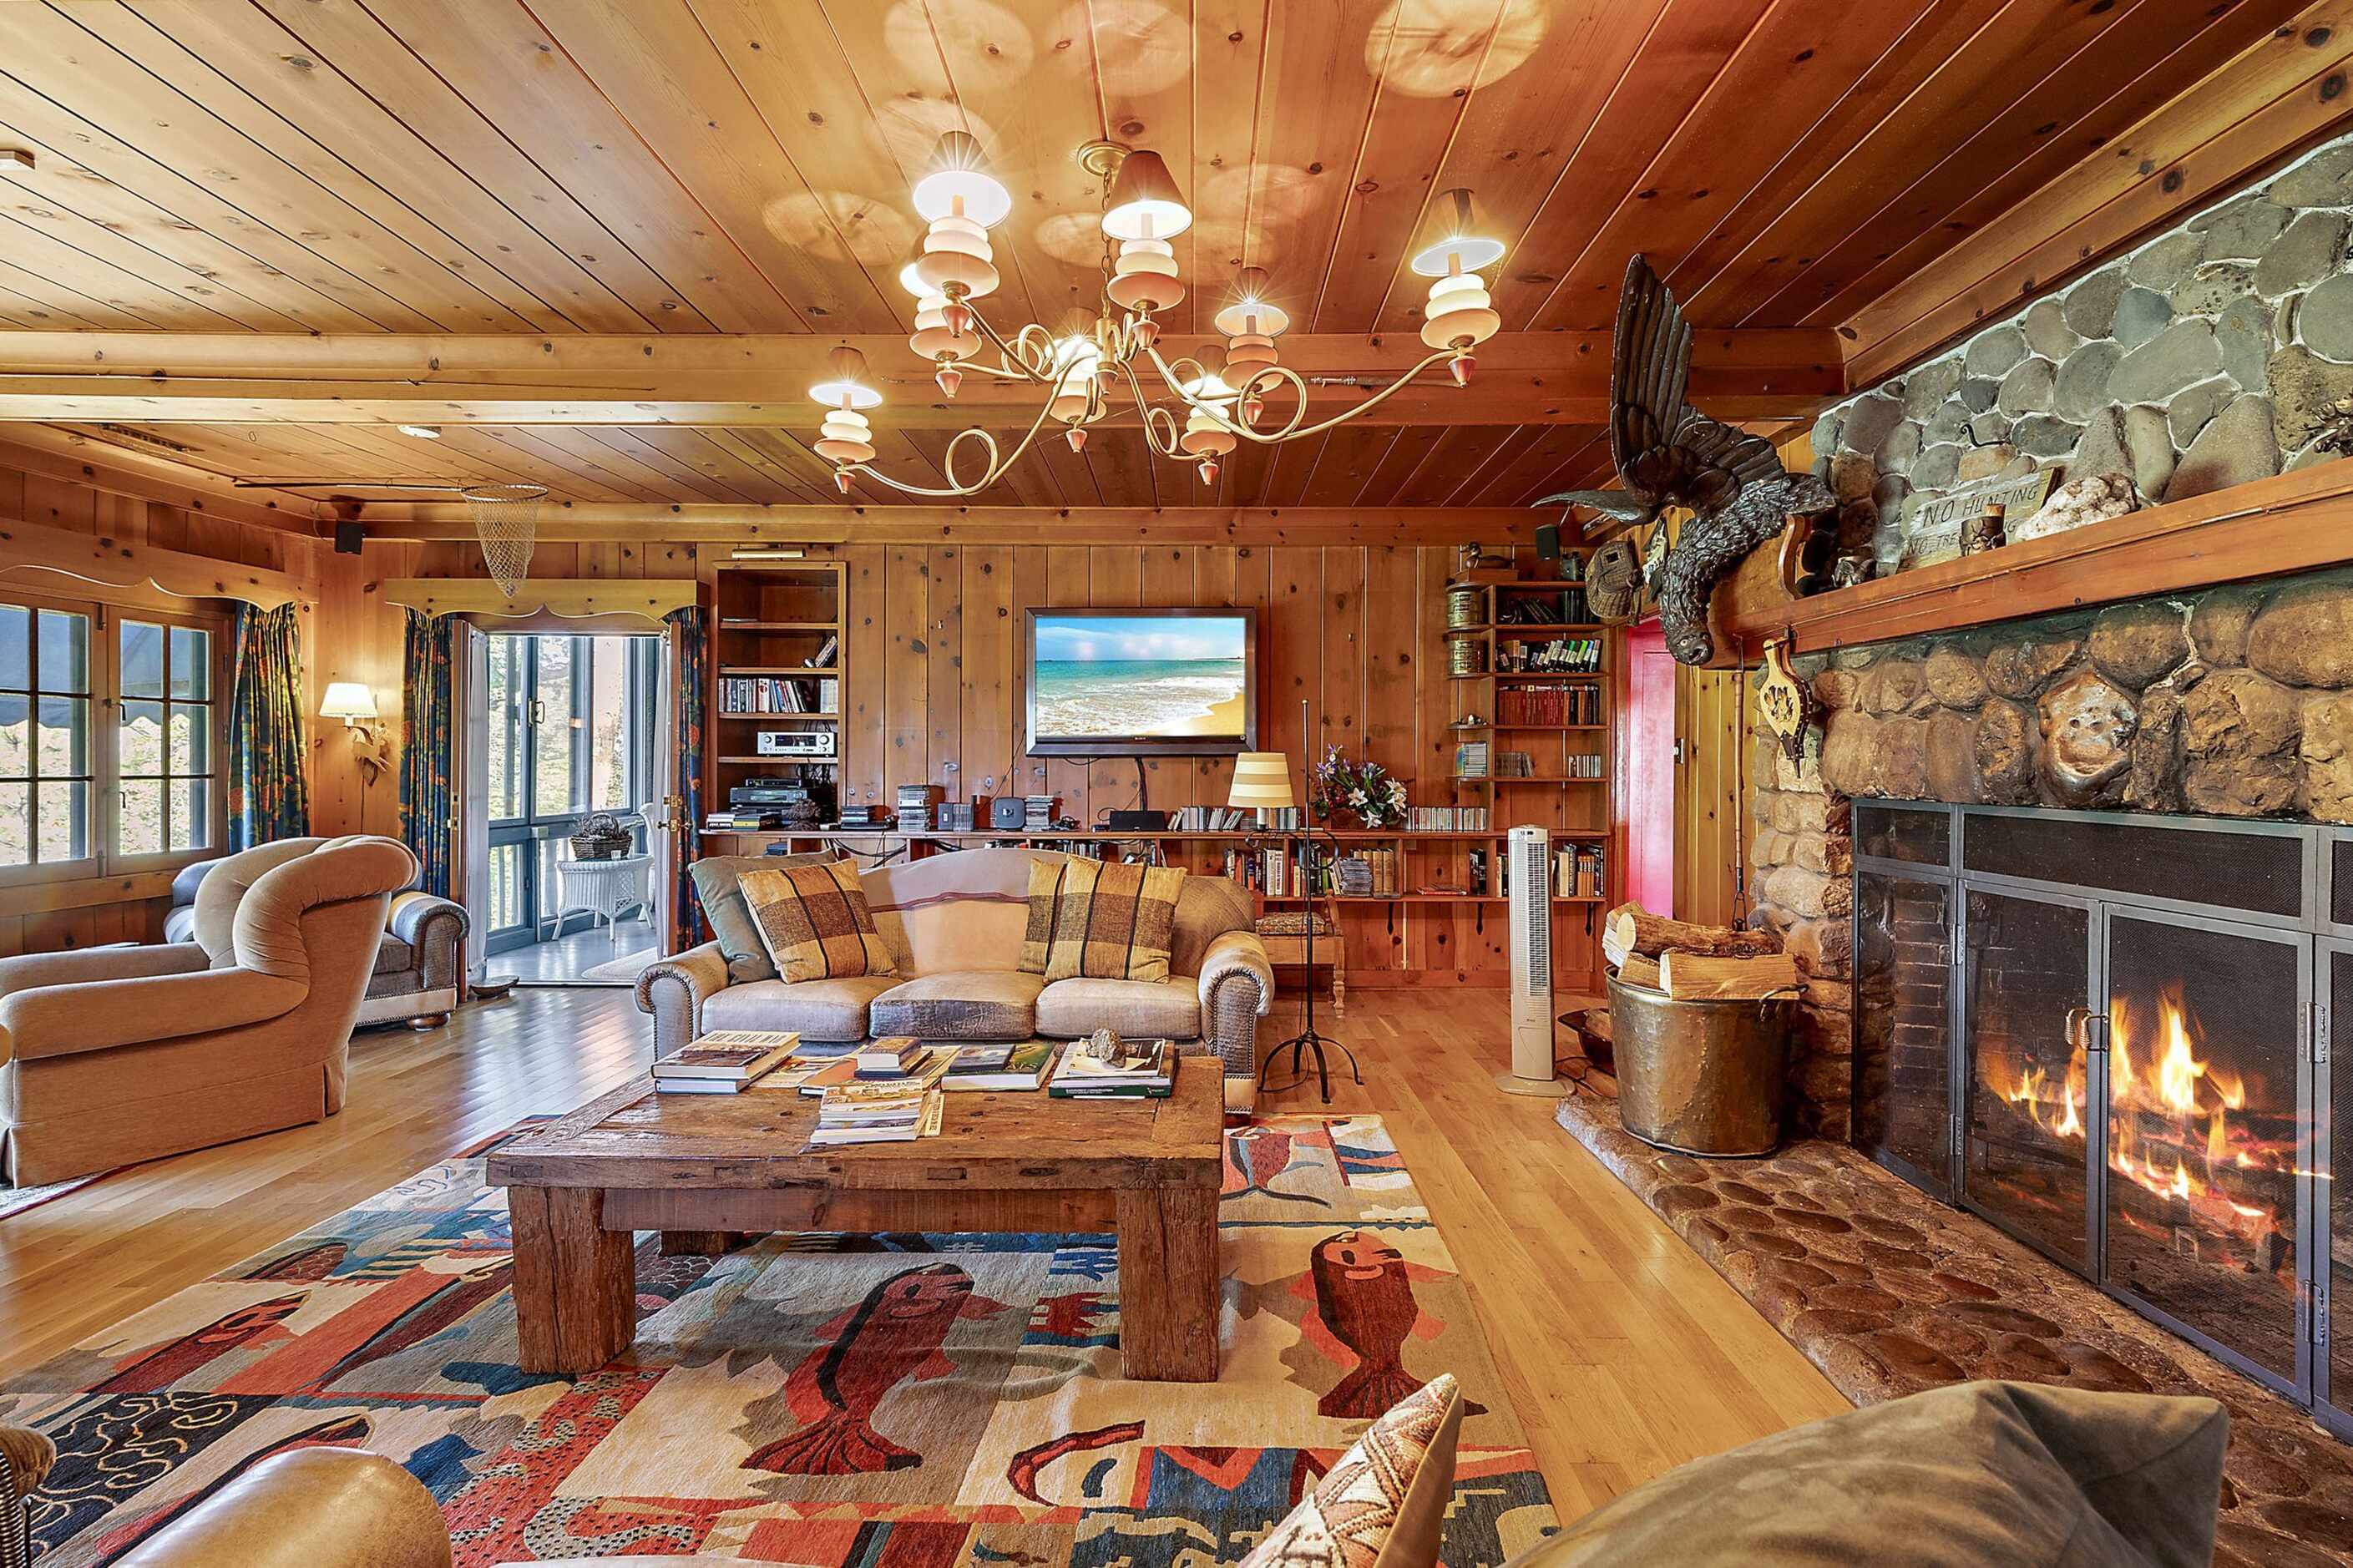 Patrick Duffy's ranch includes two miles of river frontage with steelhead trout and salmon,...